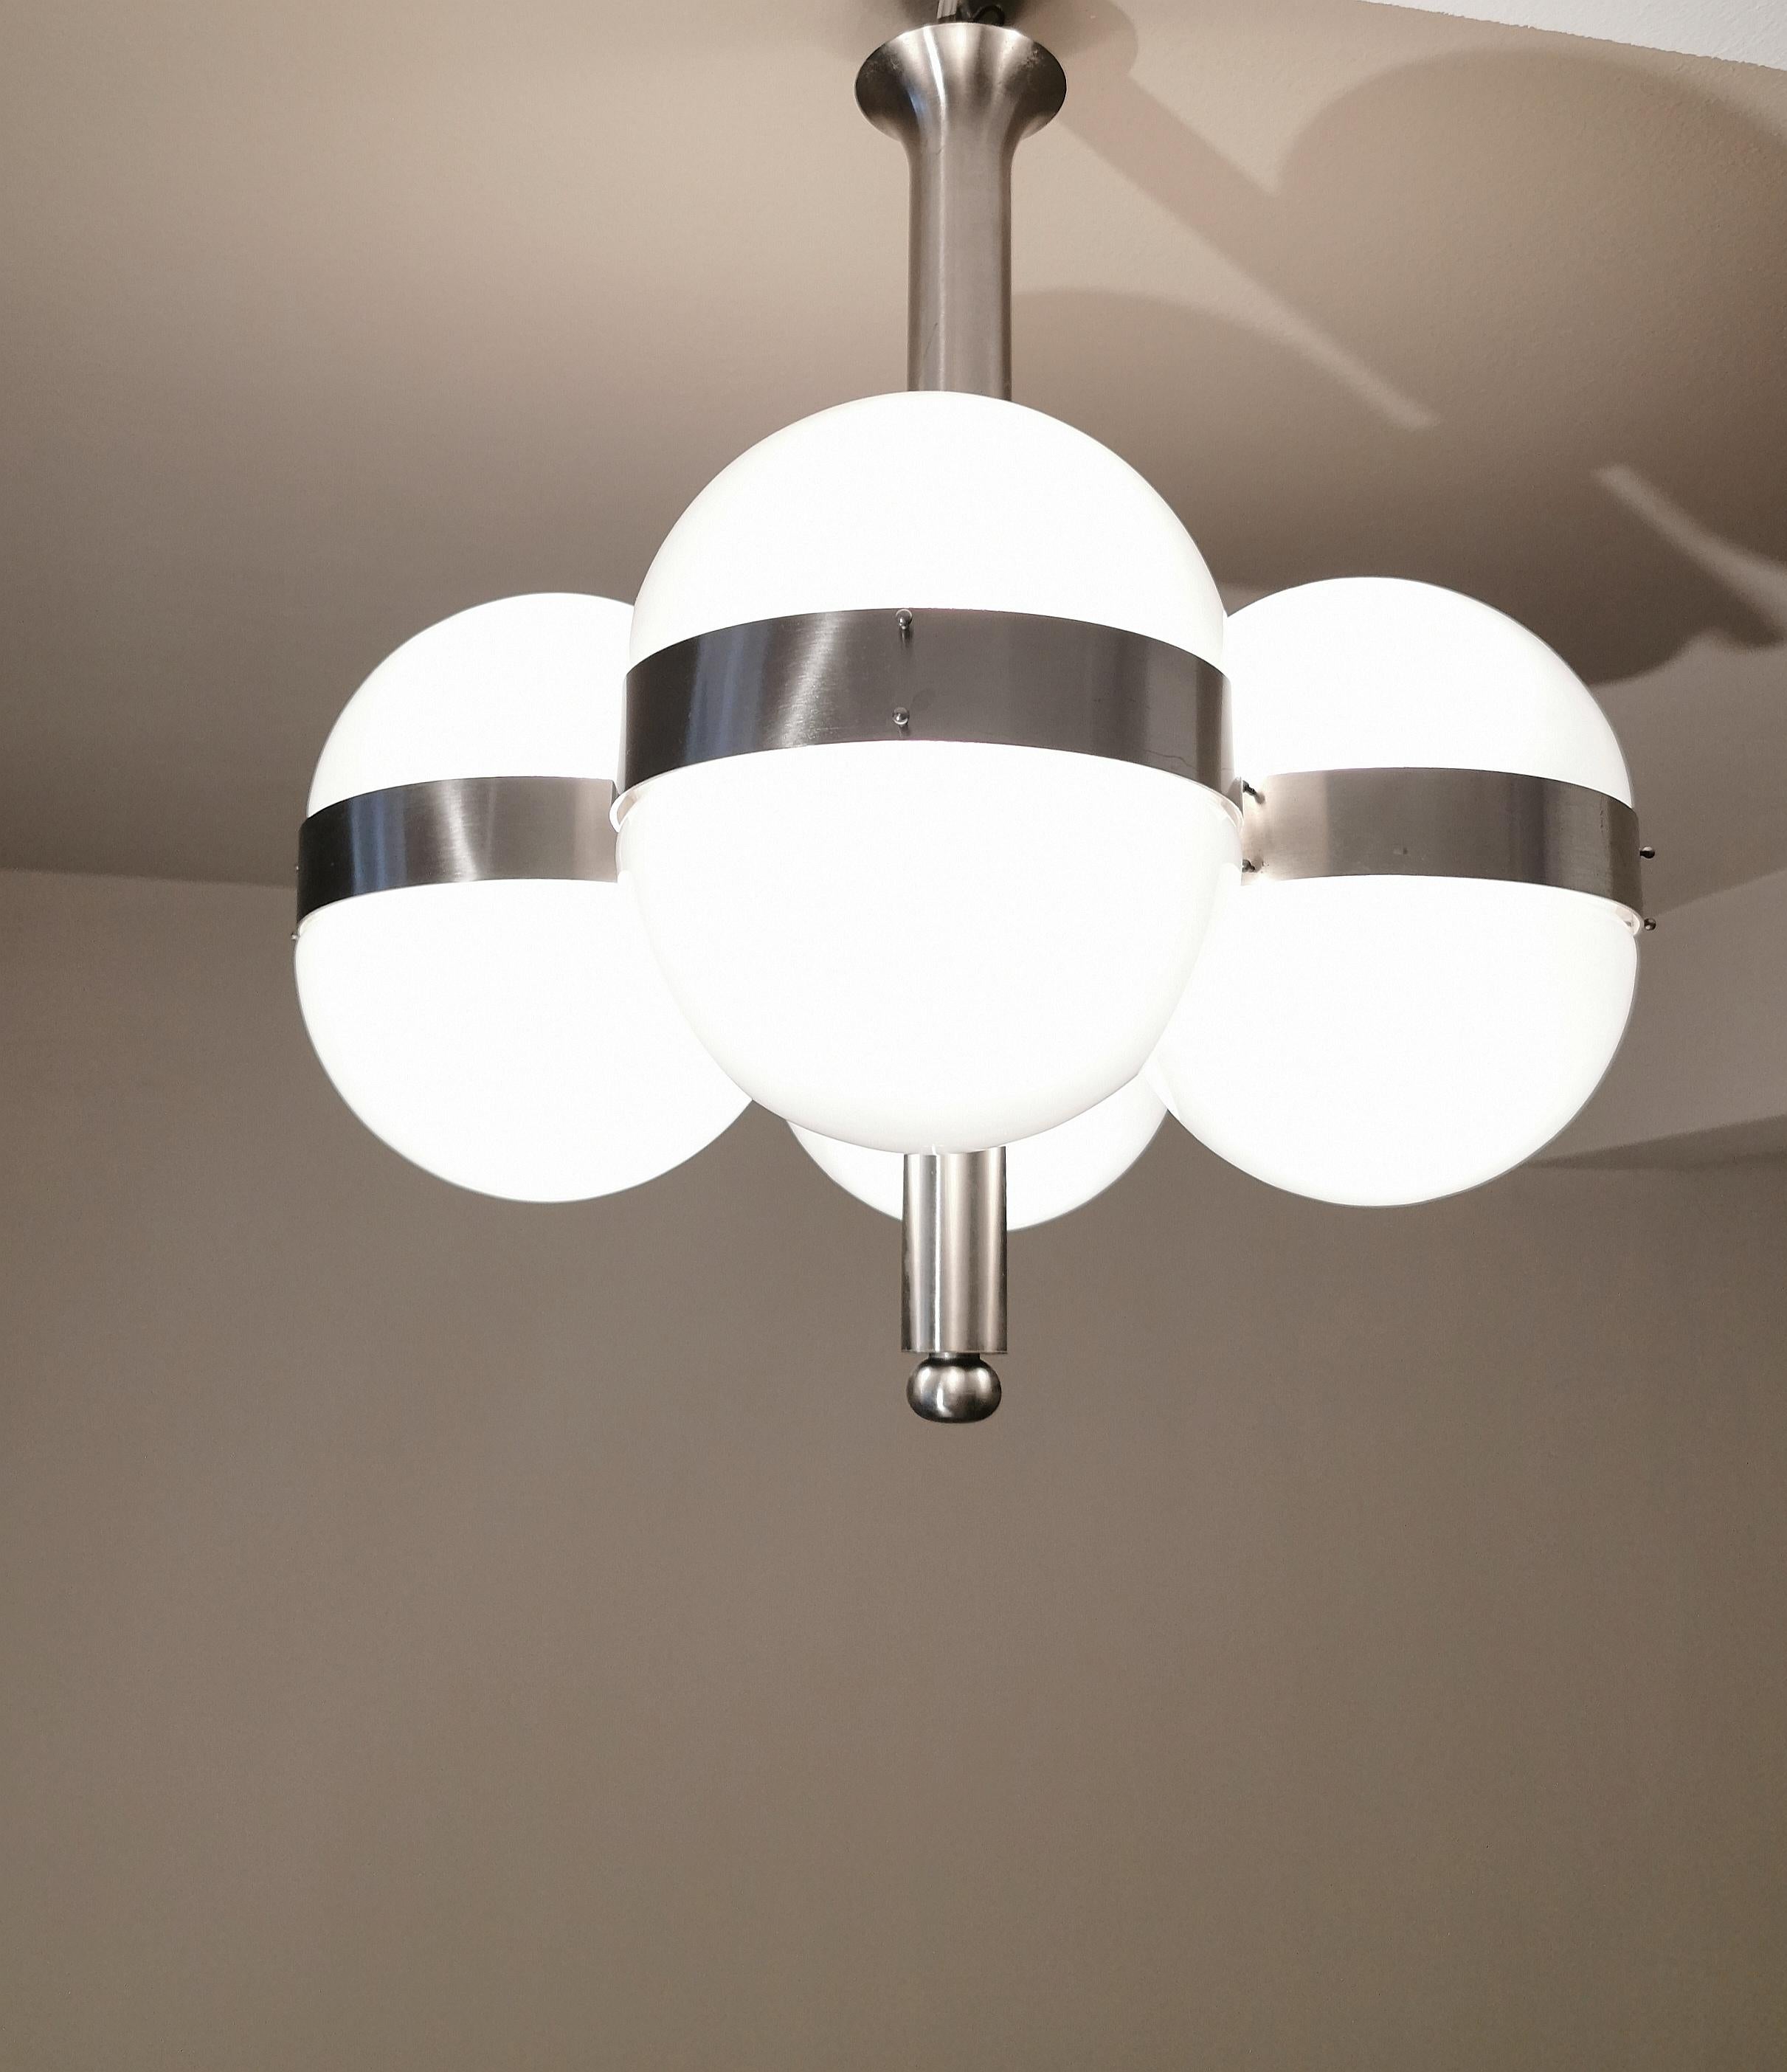 Very particular Tetraclio chandelier with 8 lights E27 designed by the famous Italian designer Sergio Mazza and produced by Artemide, a company specialized in the production of lighting accessories. The chandelier has 8 satin glasses that fit into a